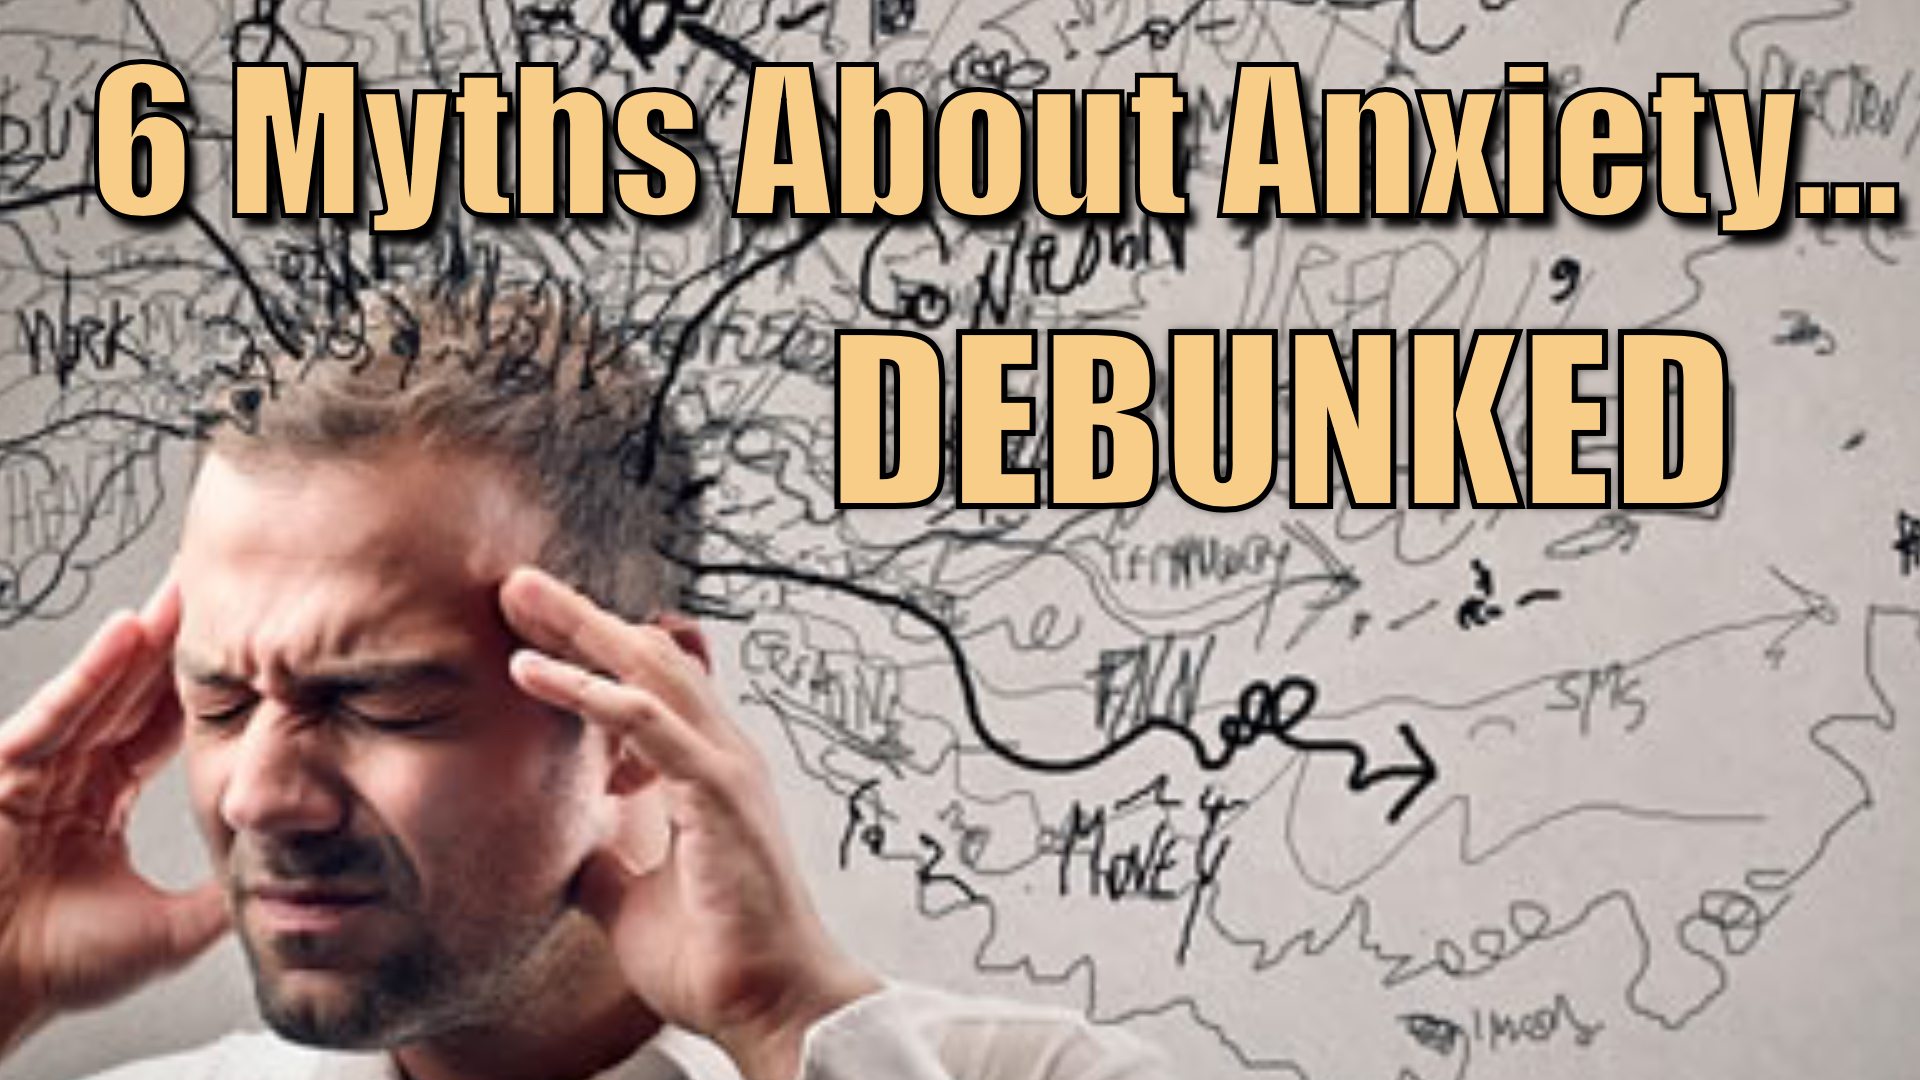 Video: 6 Myths about anxiety debunked. A Kyle2U Short